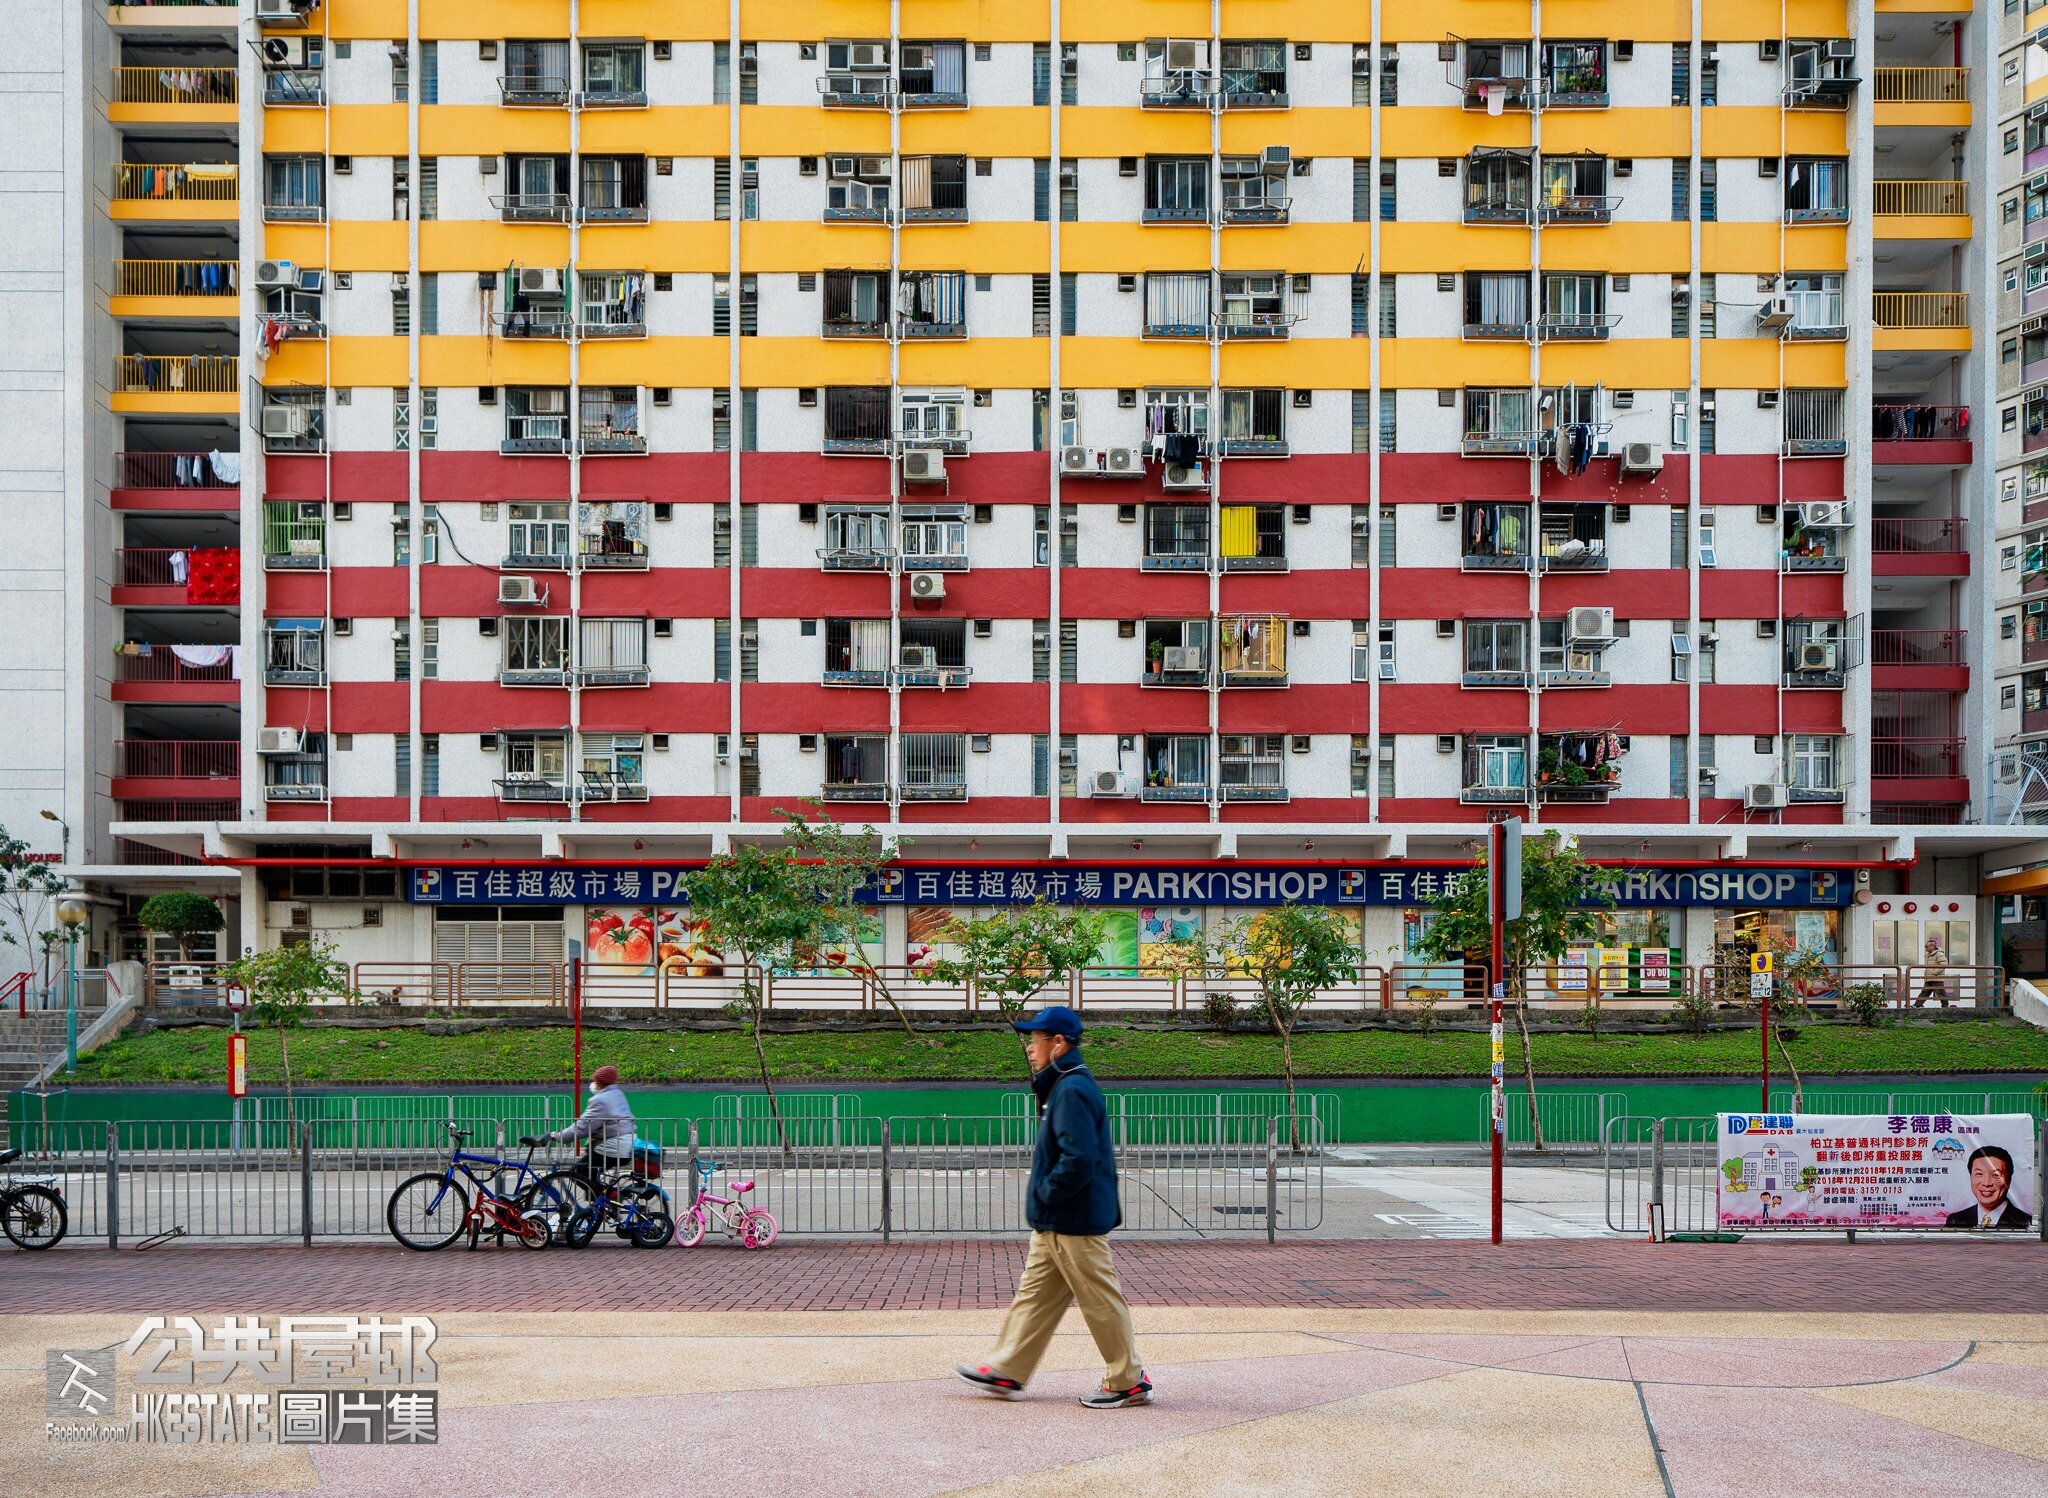 We Are HKers - William Leung | The reality of the community through a public housing photographer’s lens